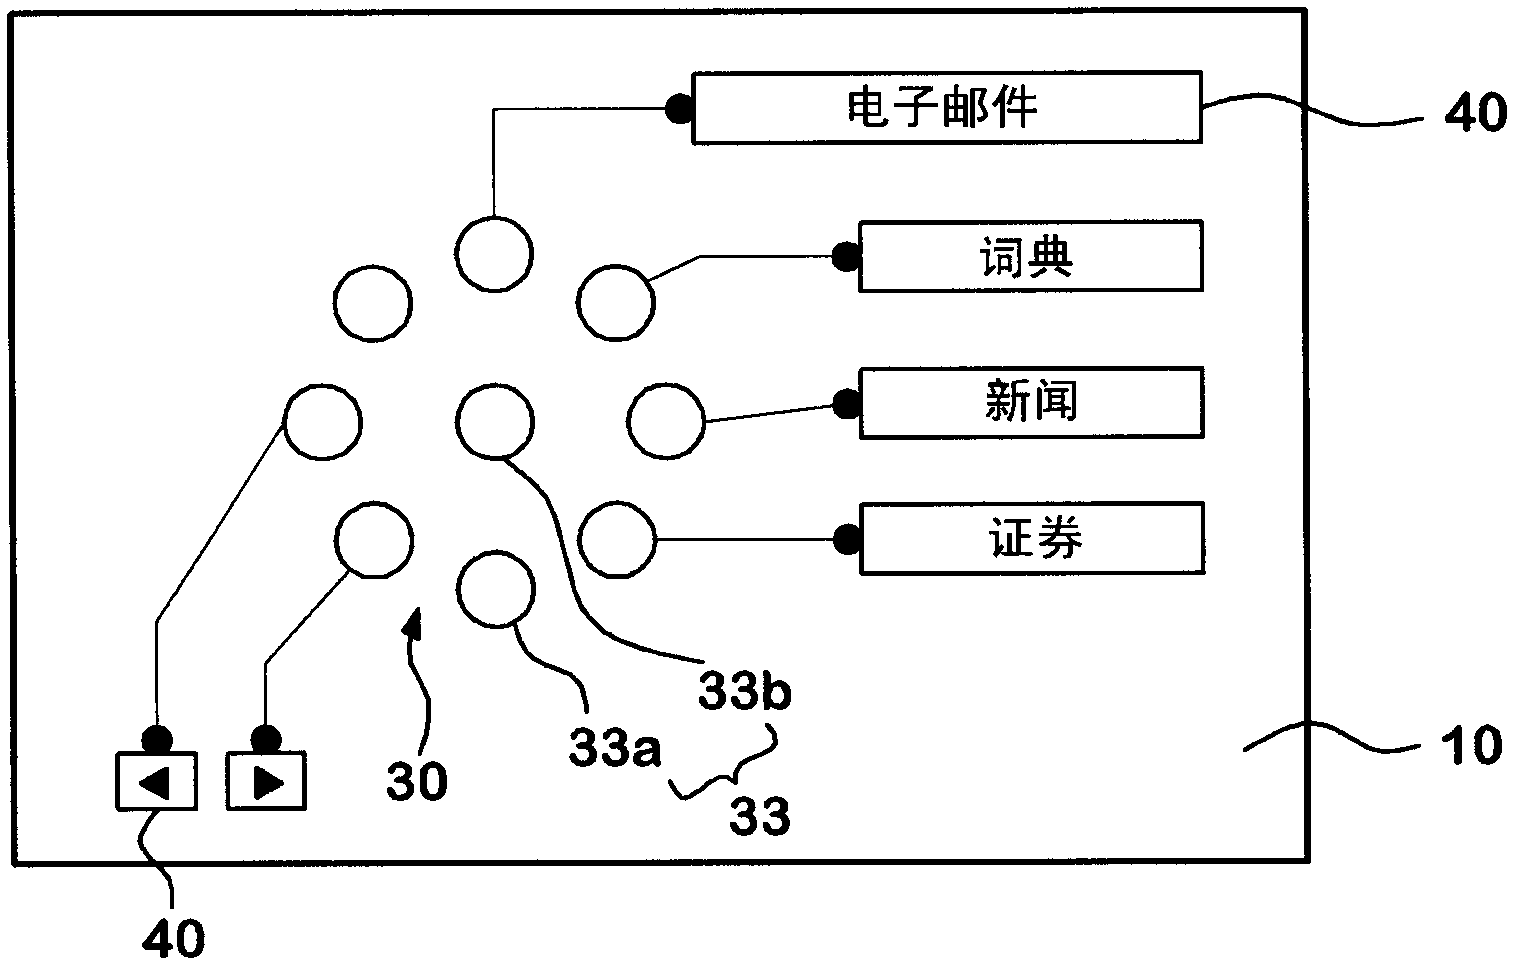 Multidirectional expansion cursor and method for forming multidirectional expansion cursor